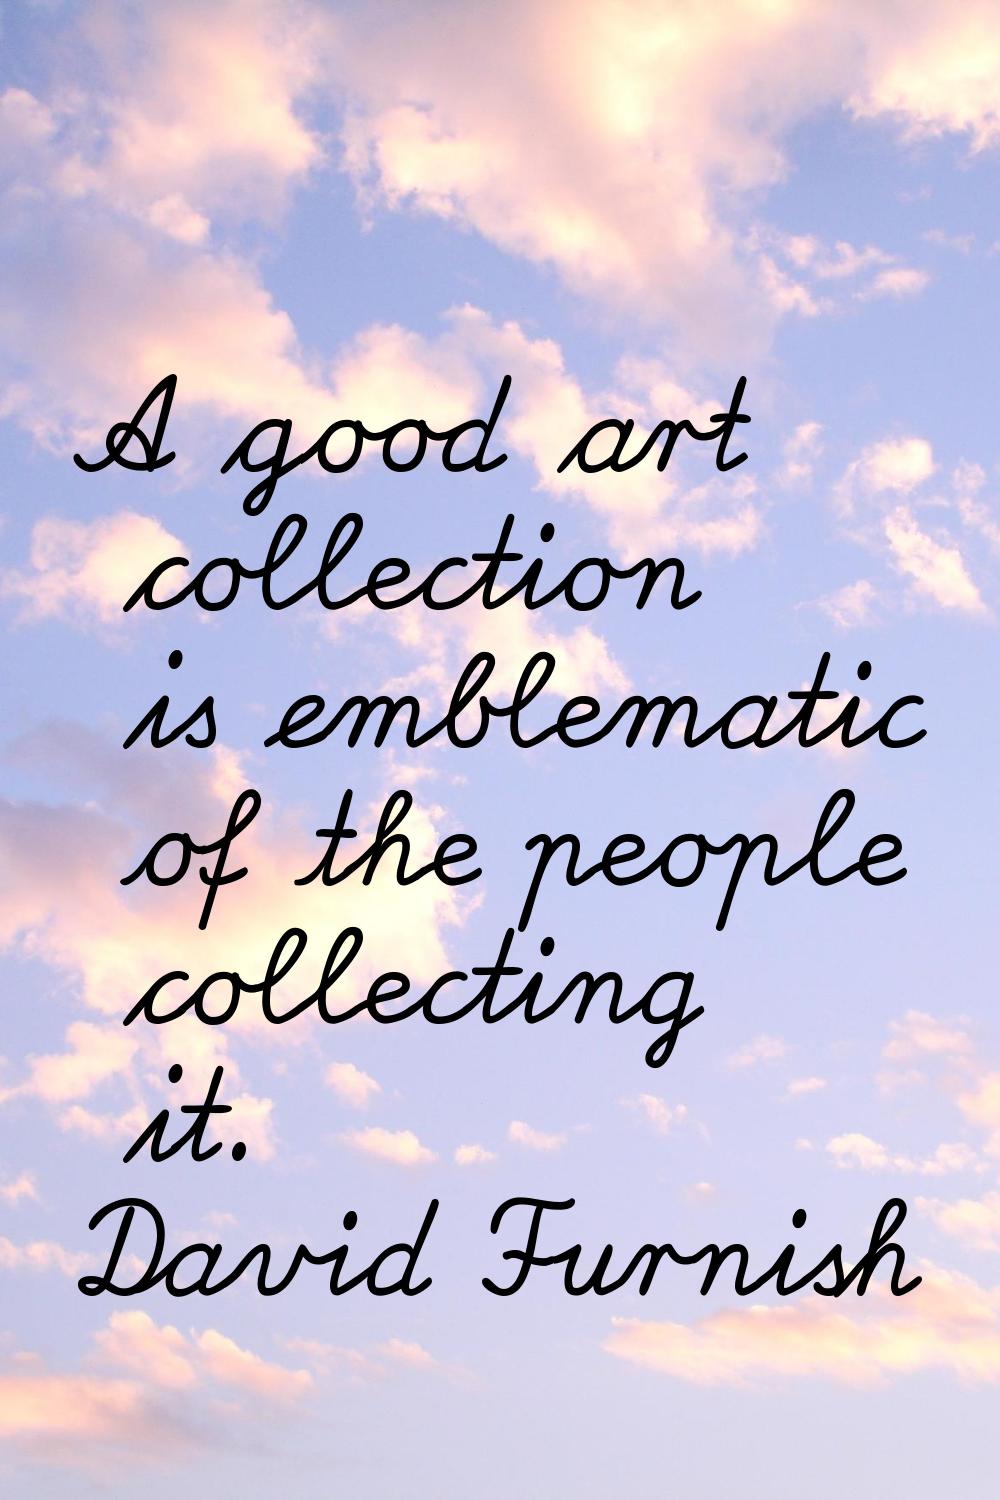 A good art collection is emblematic of the people collecting it.